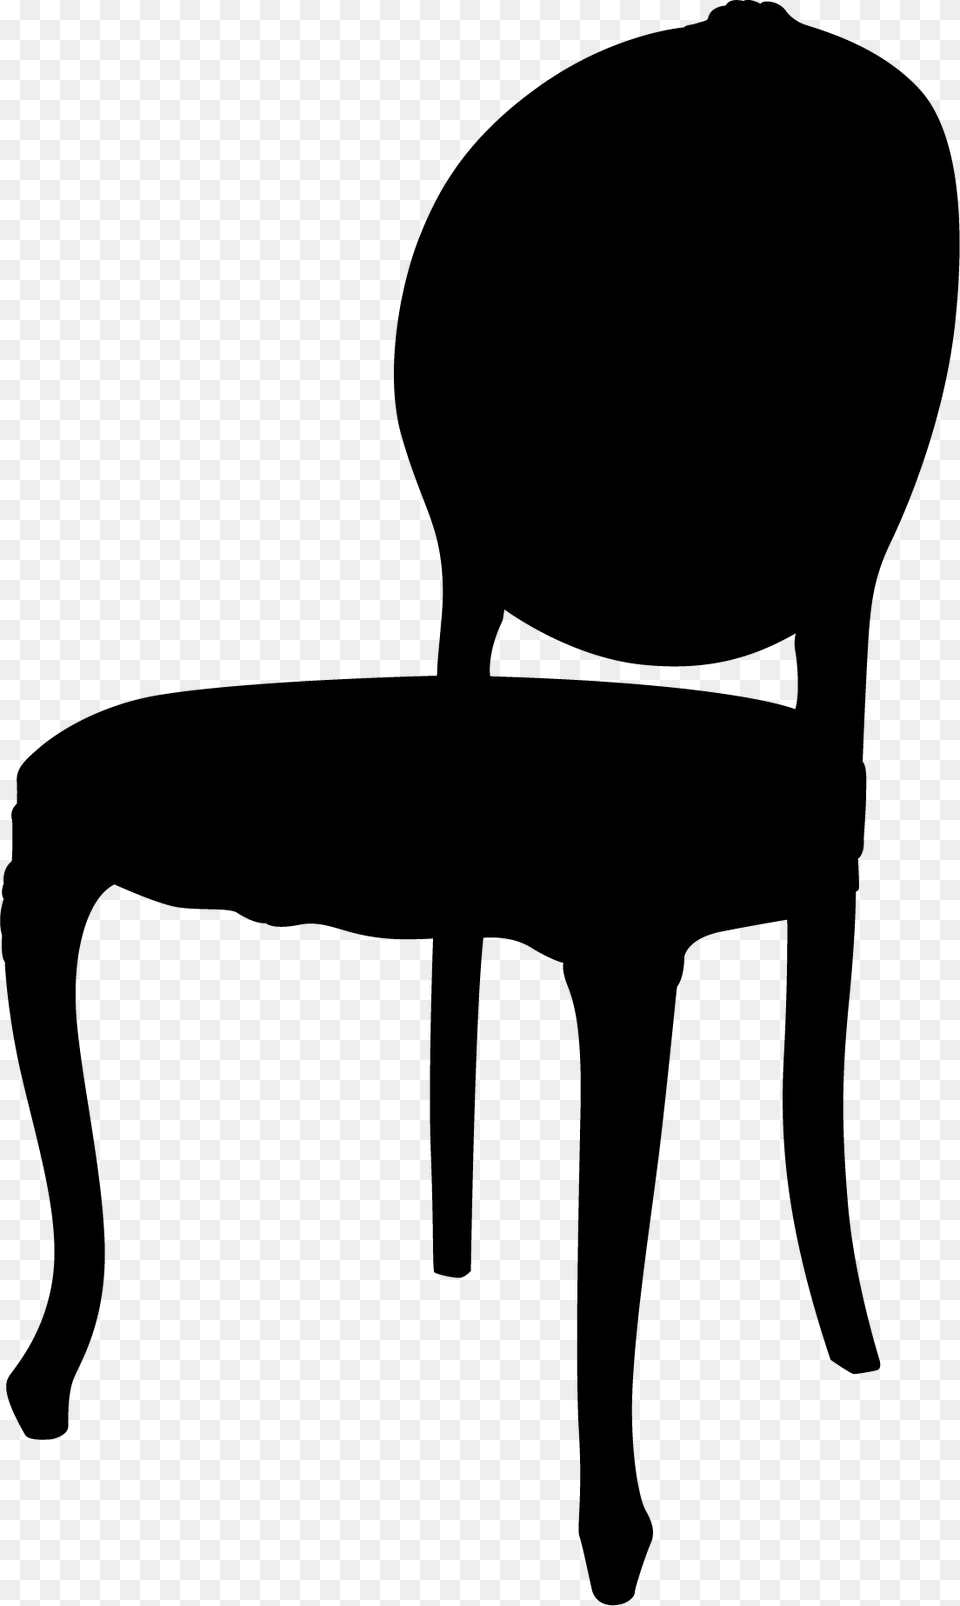 Chair, Furniture, Silhouette, Stencil, Animal Png